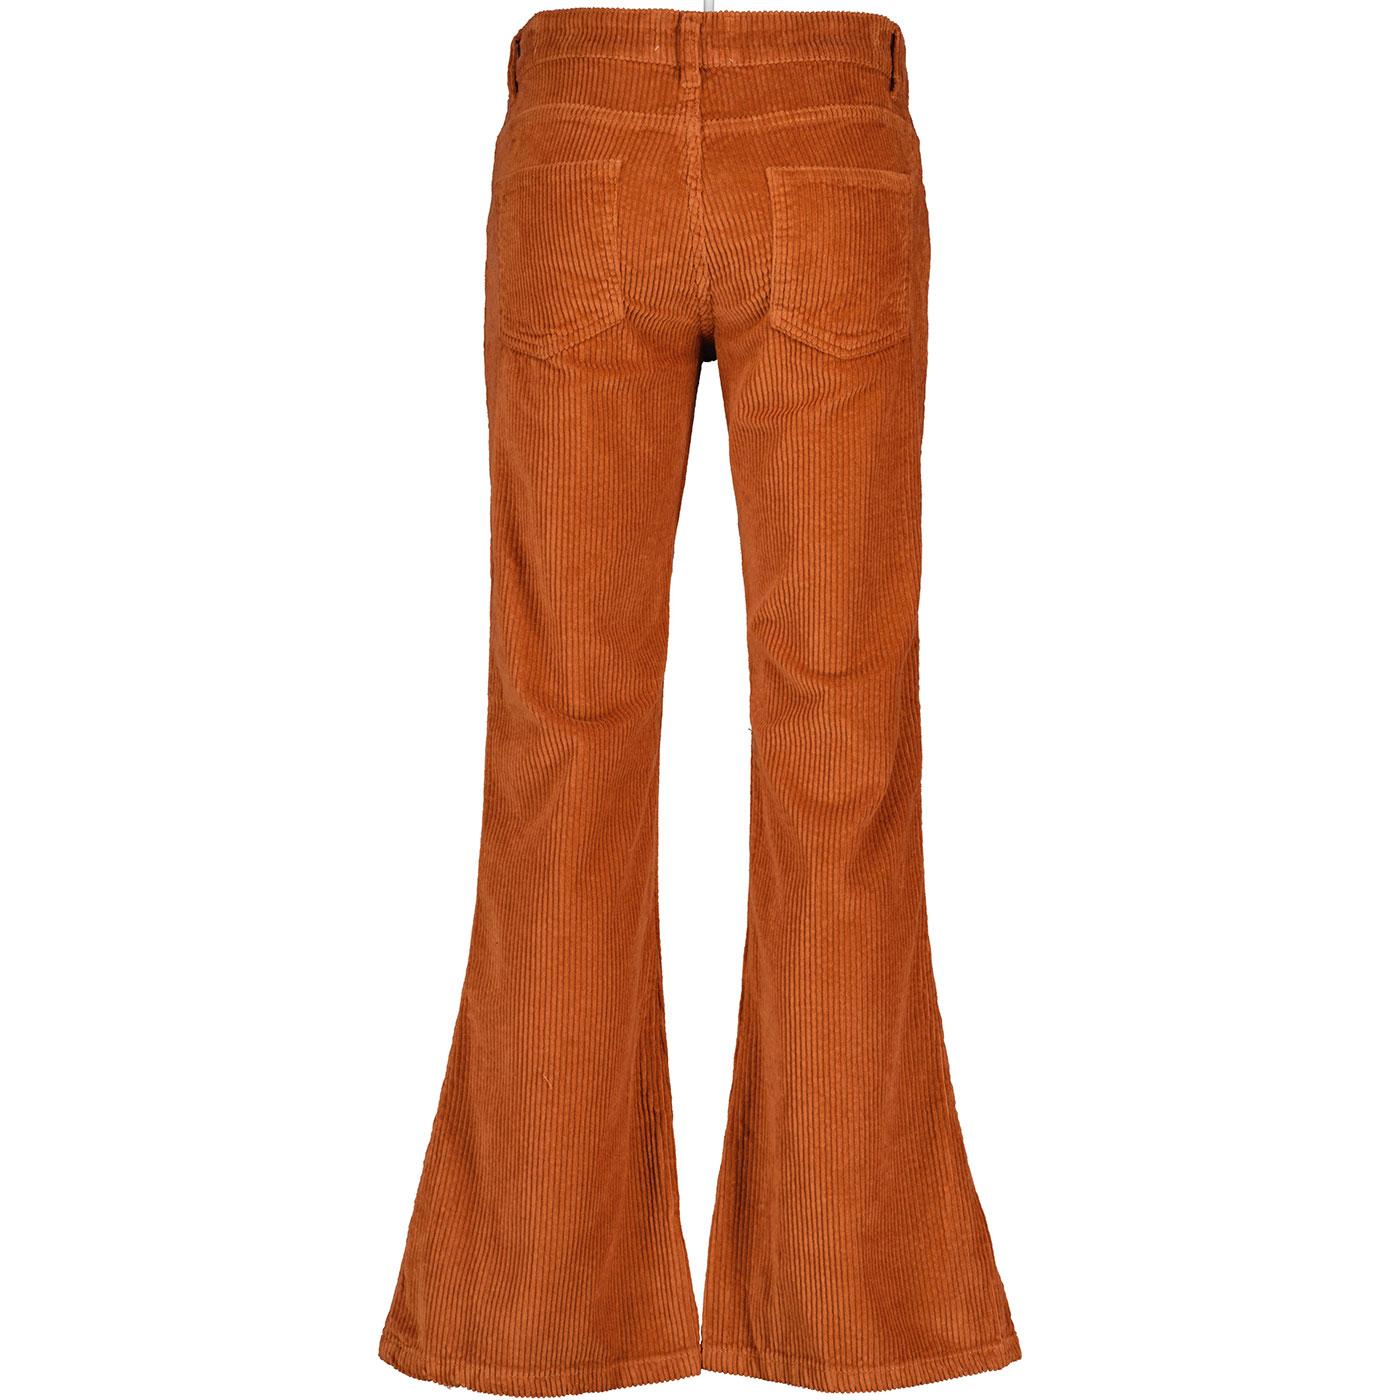 Rogue Madcap England Retro 1970s Jumbo Cord Flares in Gingerbread